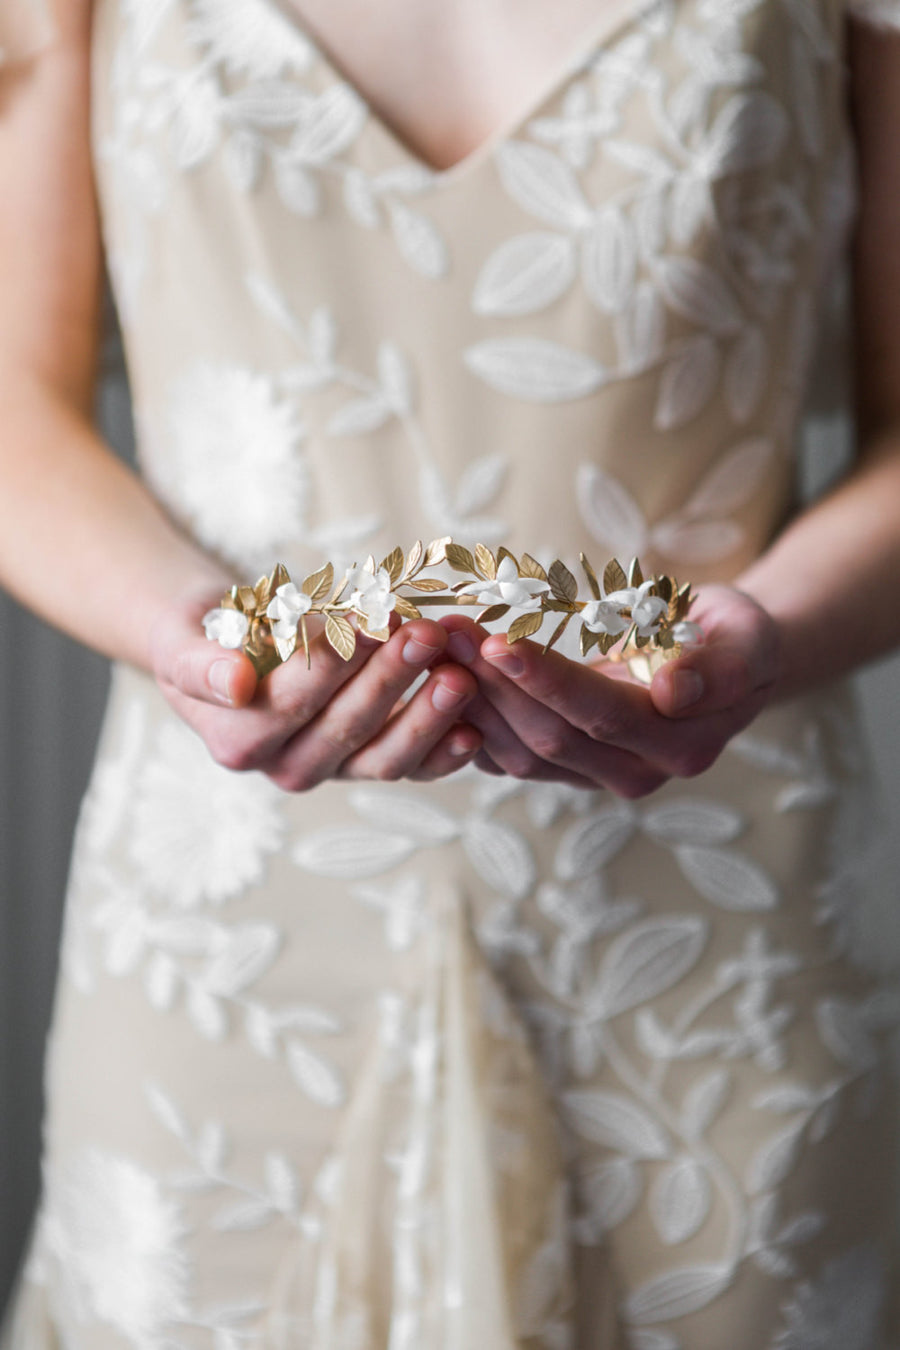 Bride wearing a crown heapiece made of gold leaves and silk flowers